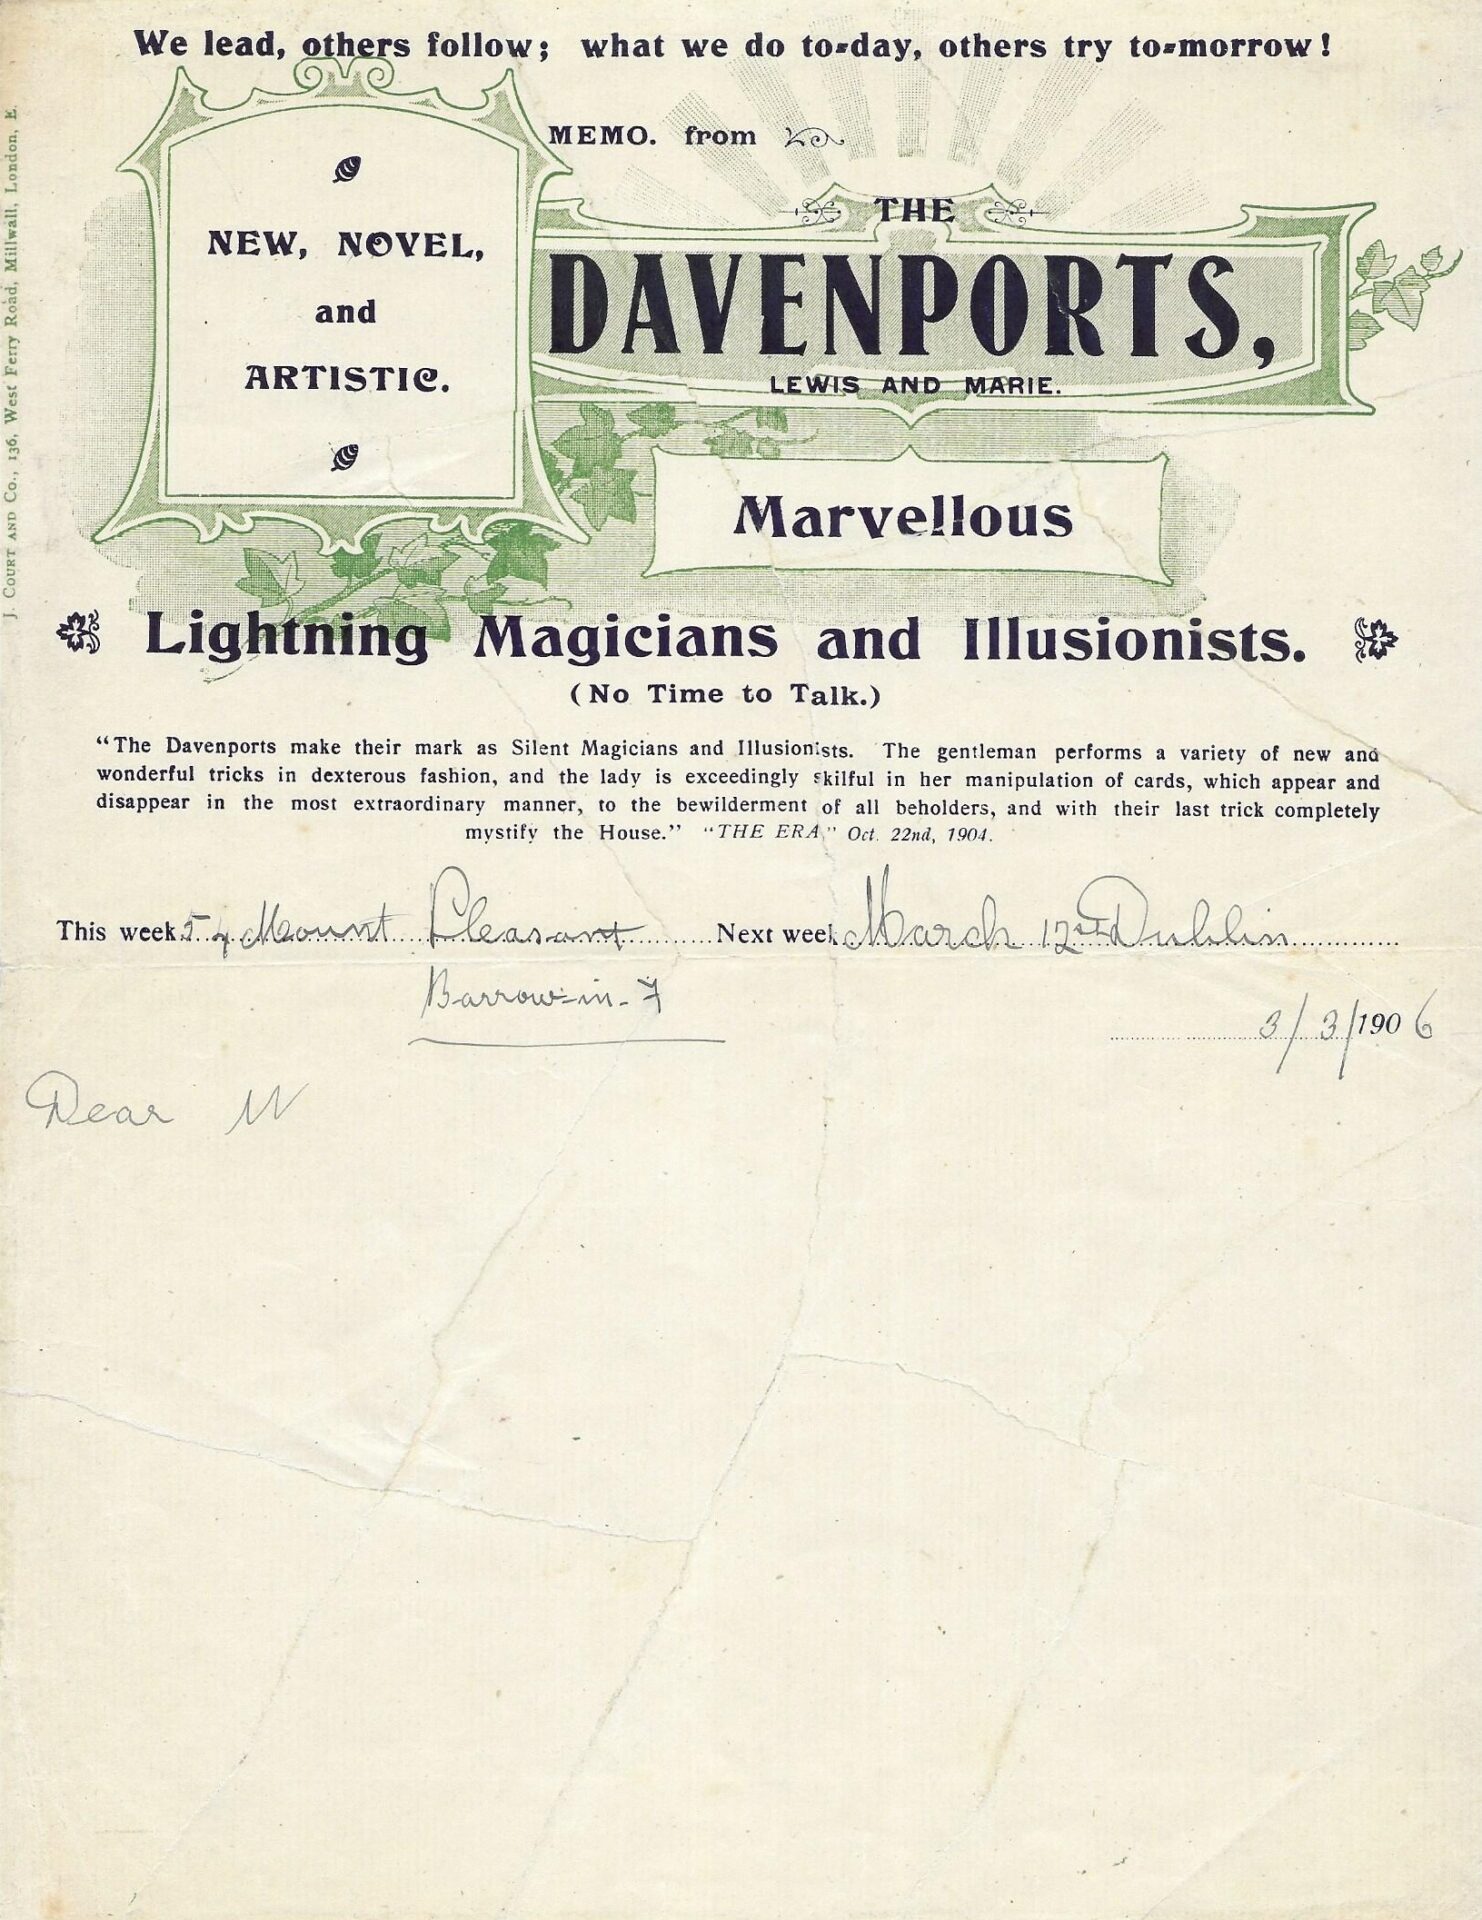 Notepaper used by The Davenports in 1906